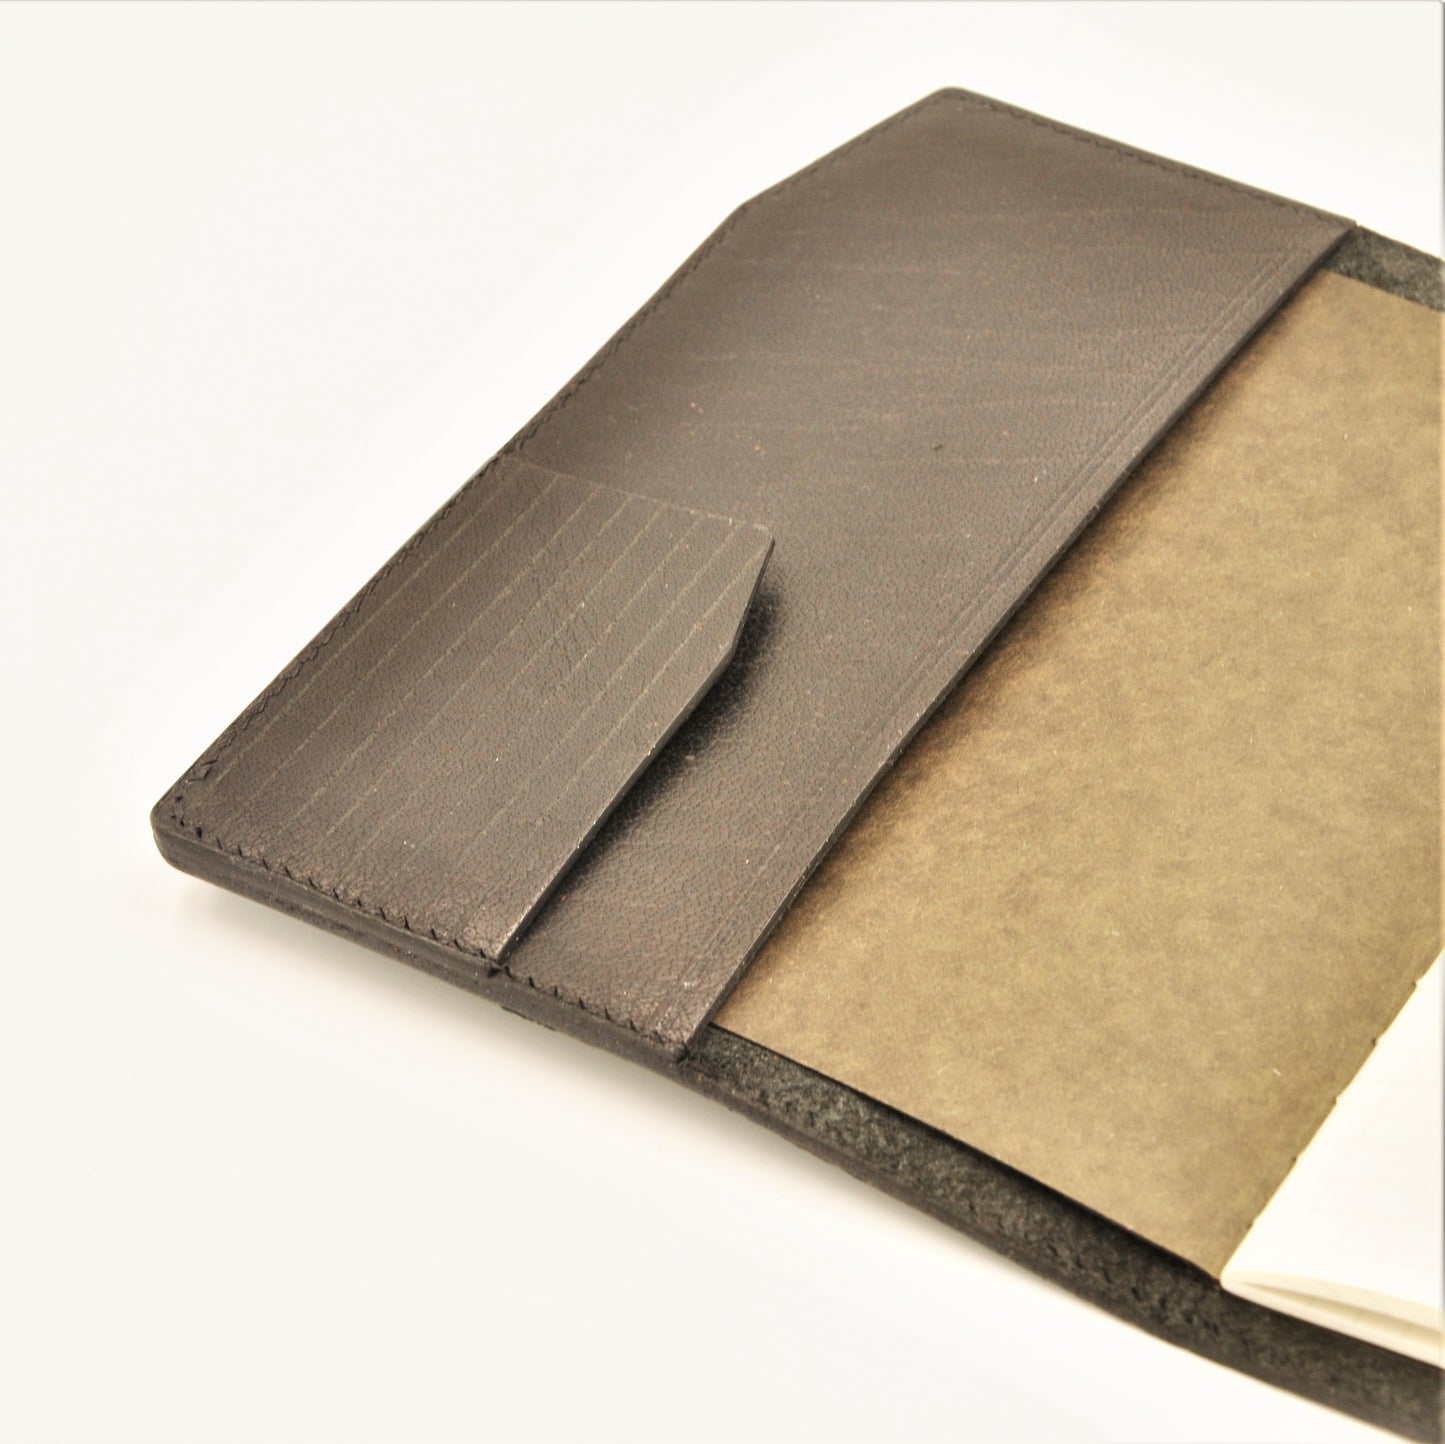 HANNOVER A5-P Notebook Sleeve